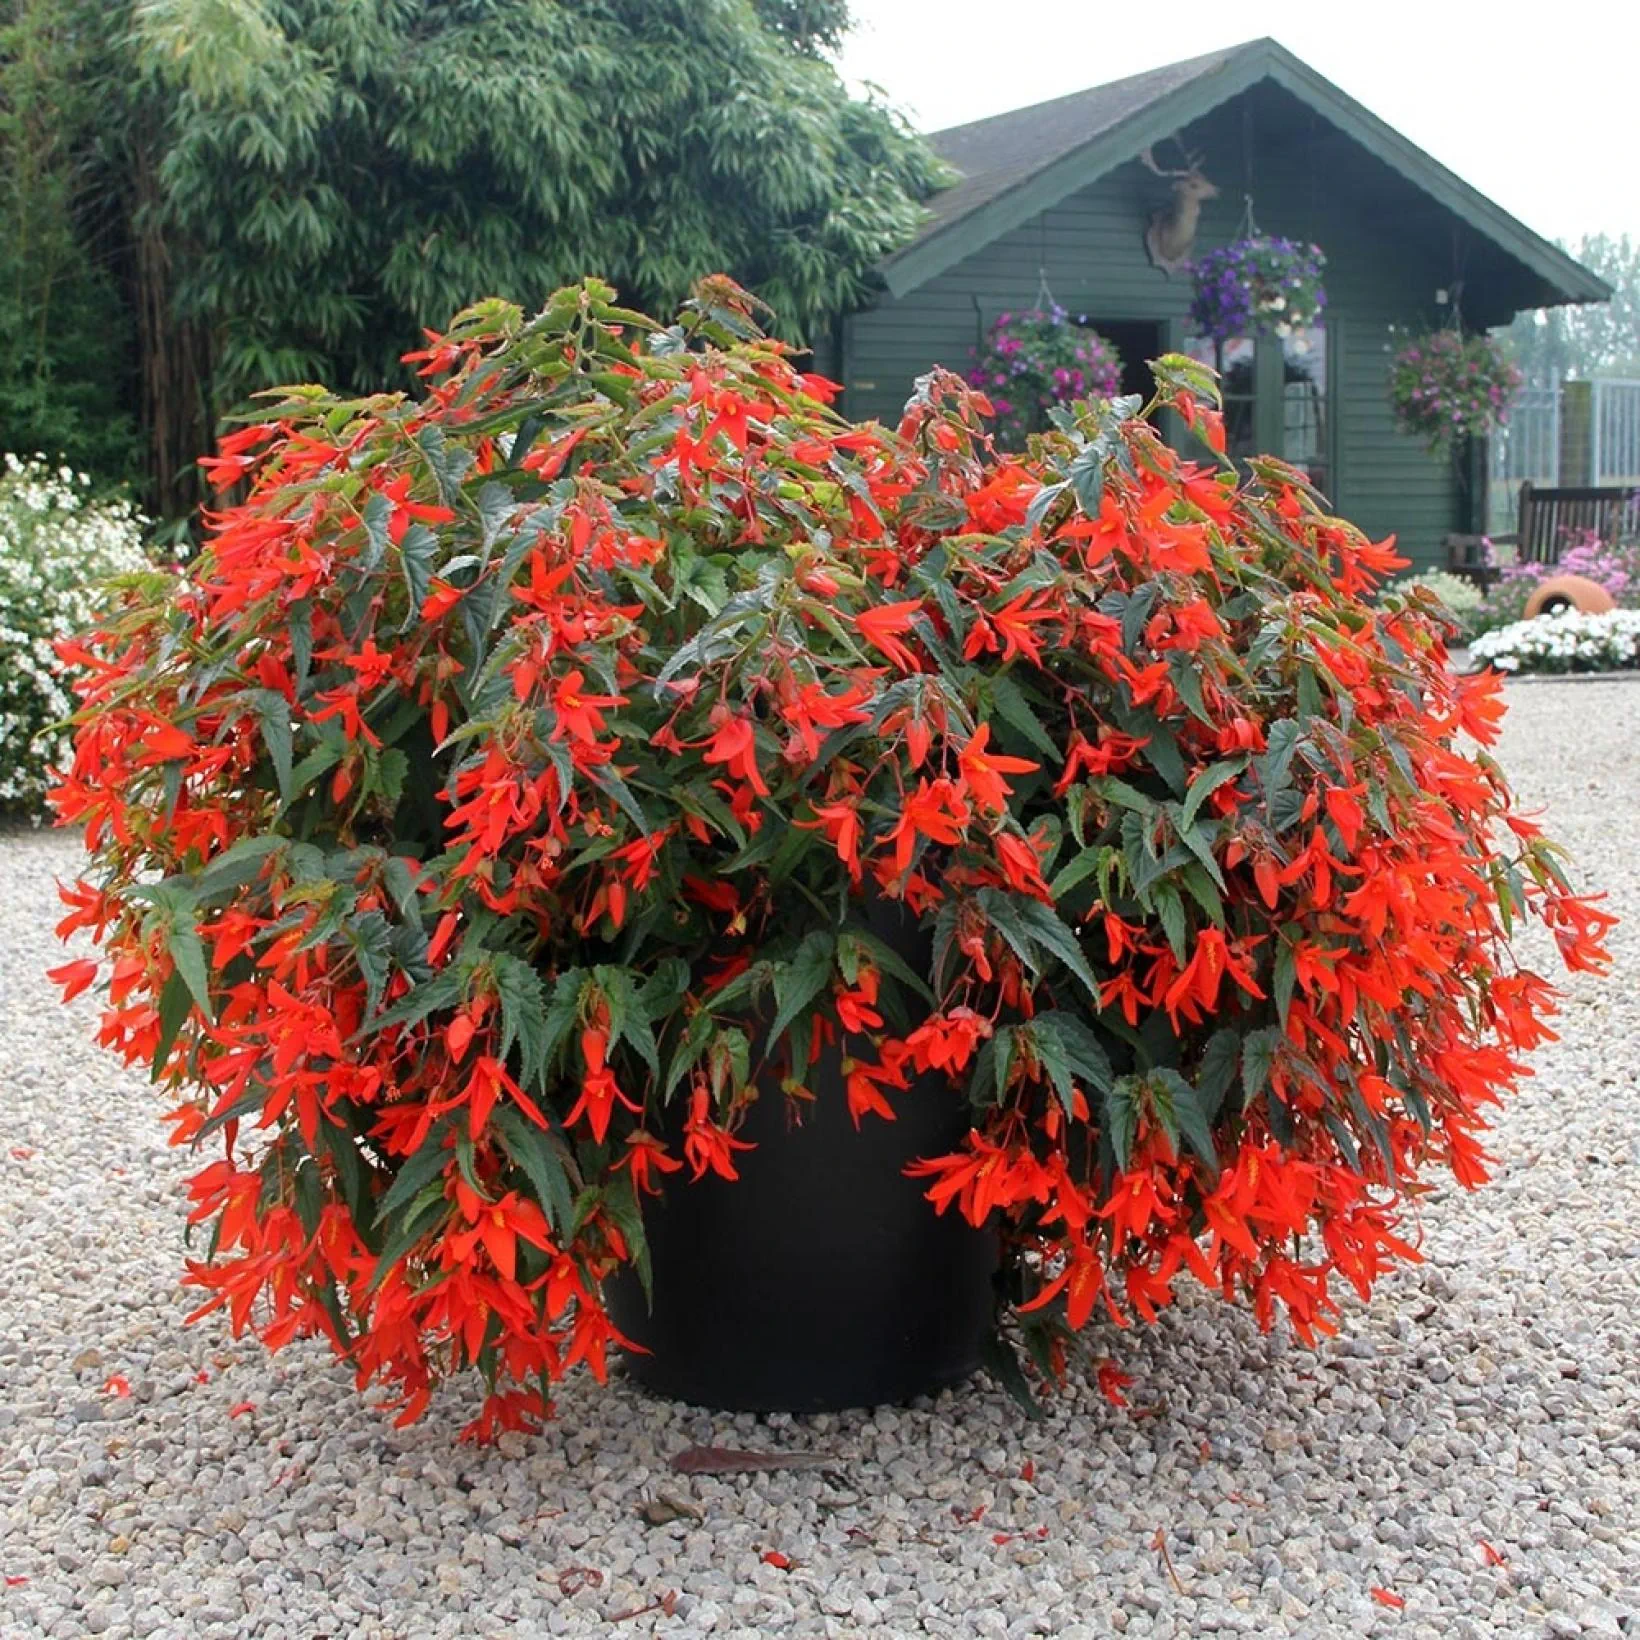 A large, lush begonia plant with vivid red flowers in a black pot, situated on a gravel surface with the New Cleome Garden and plants in the background.